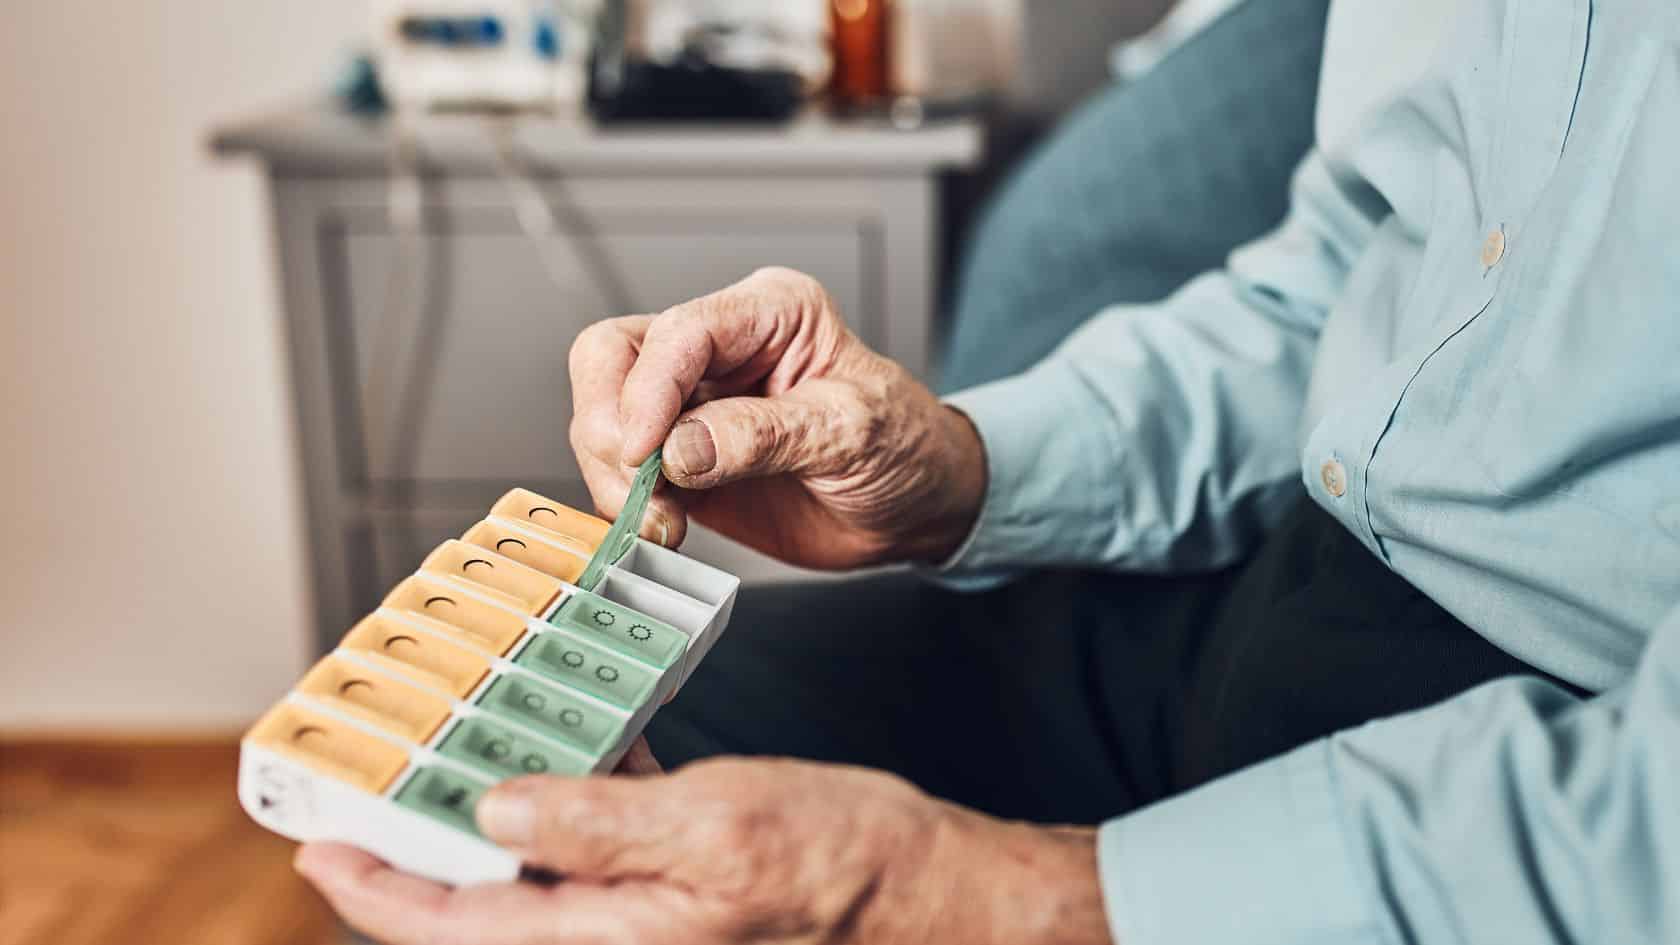 Elderly person with their medication pack